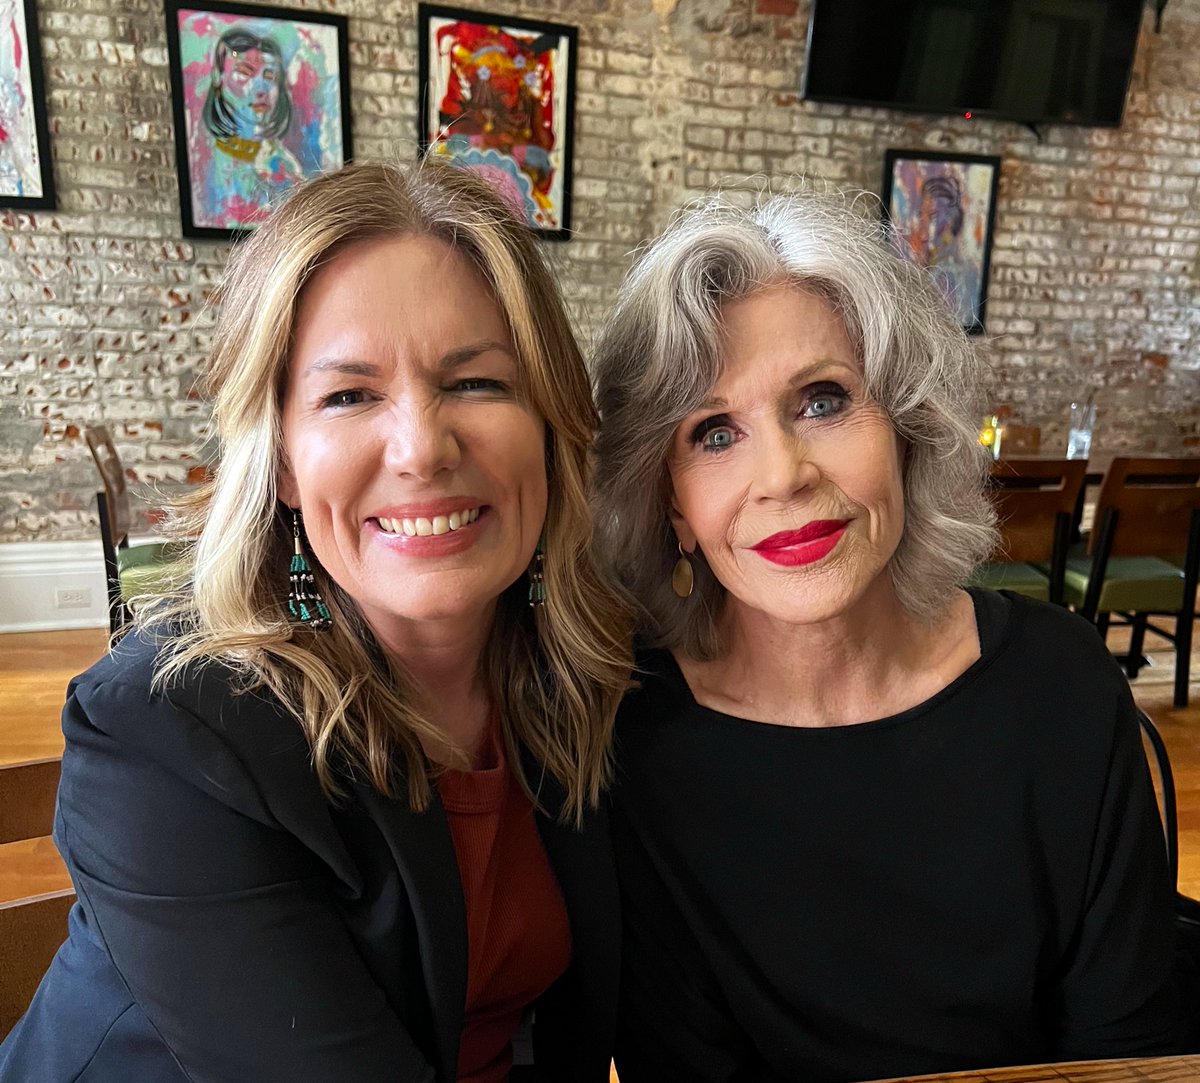 I’m lucky to work alongside @Janefonda and allies across the country to protect the land and water. #TwoJanes #DoublePower